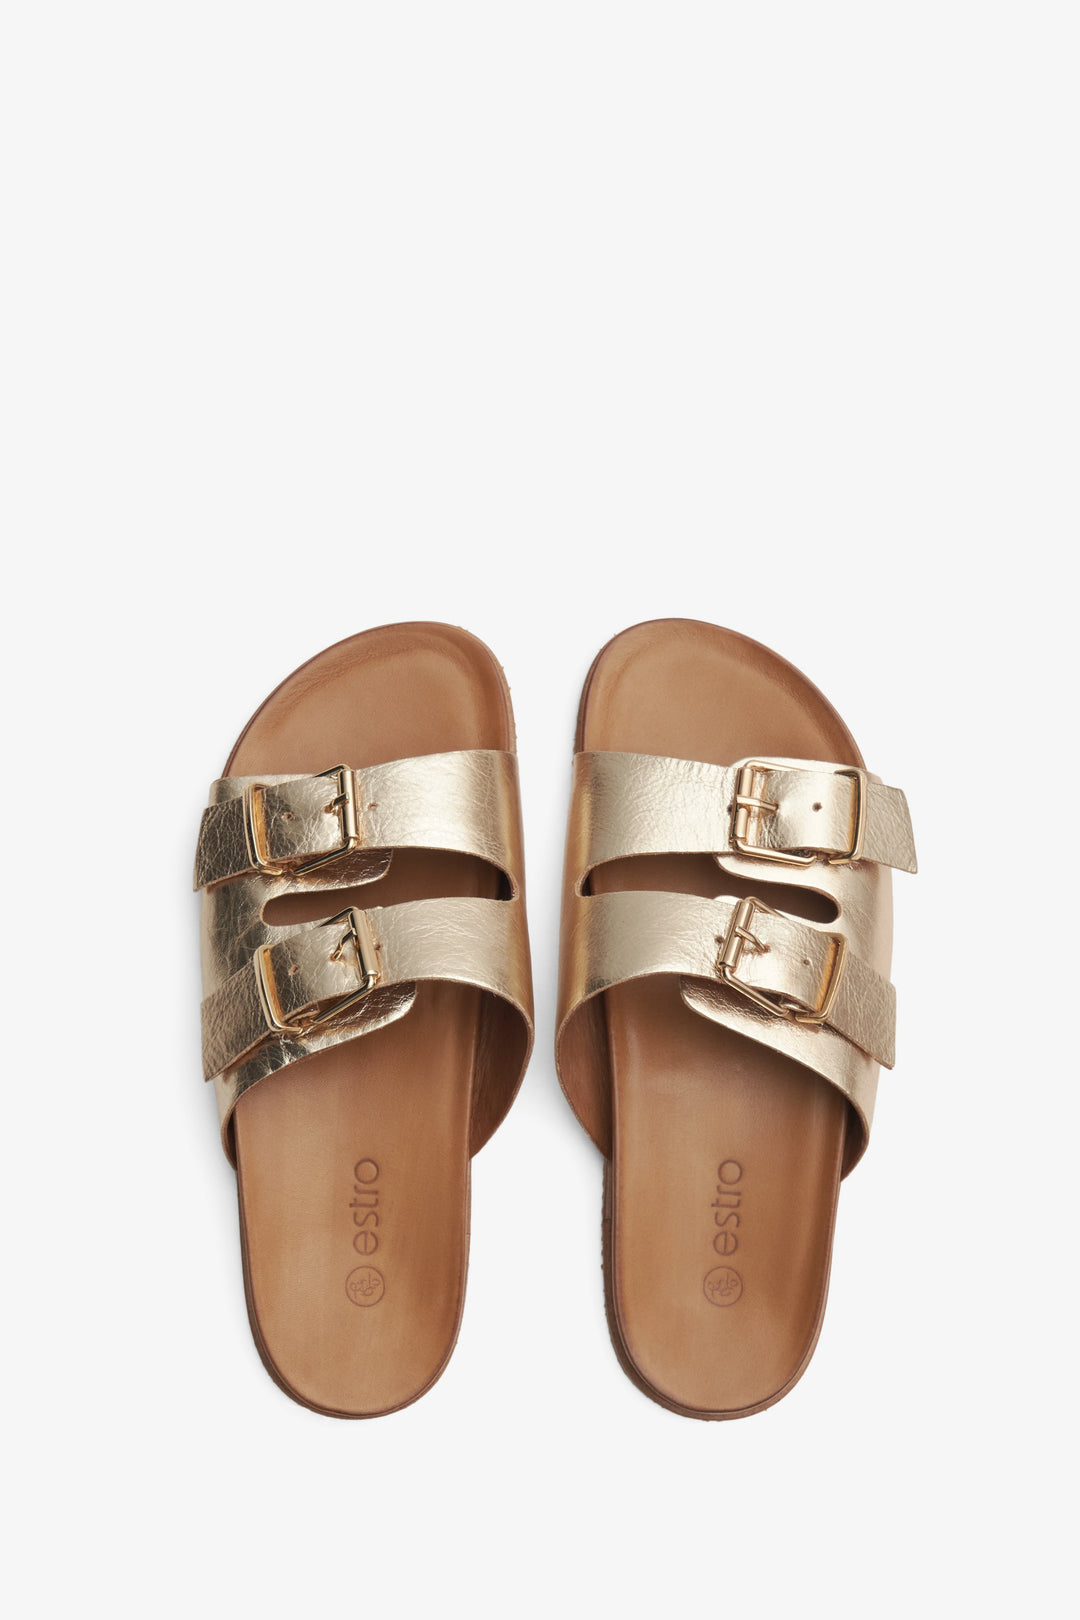 Women's gold Estro slide sandals made of Italian natural leather - presentation of shoes from above.